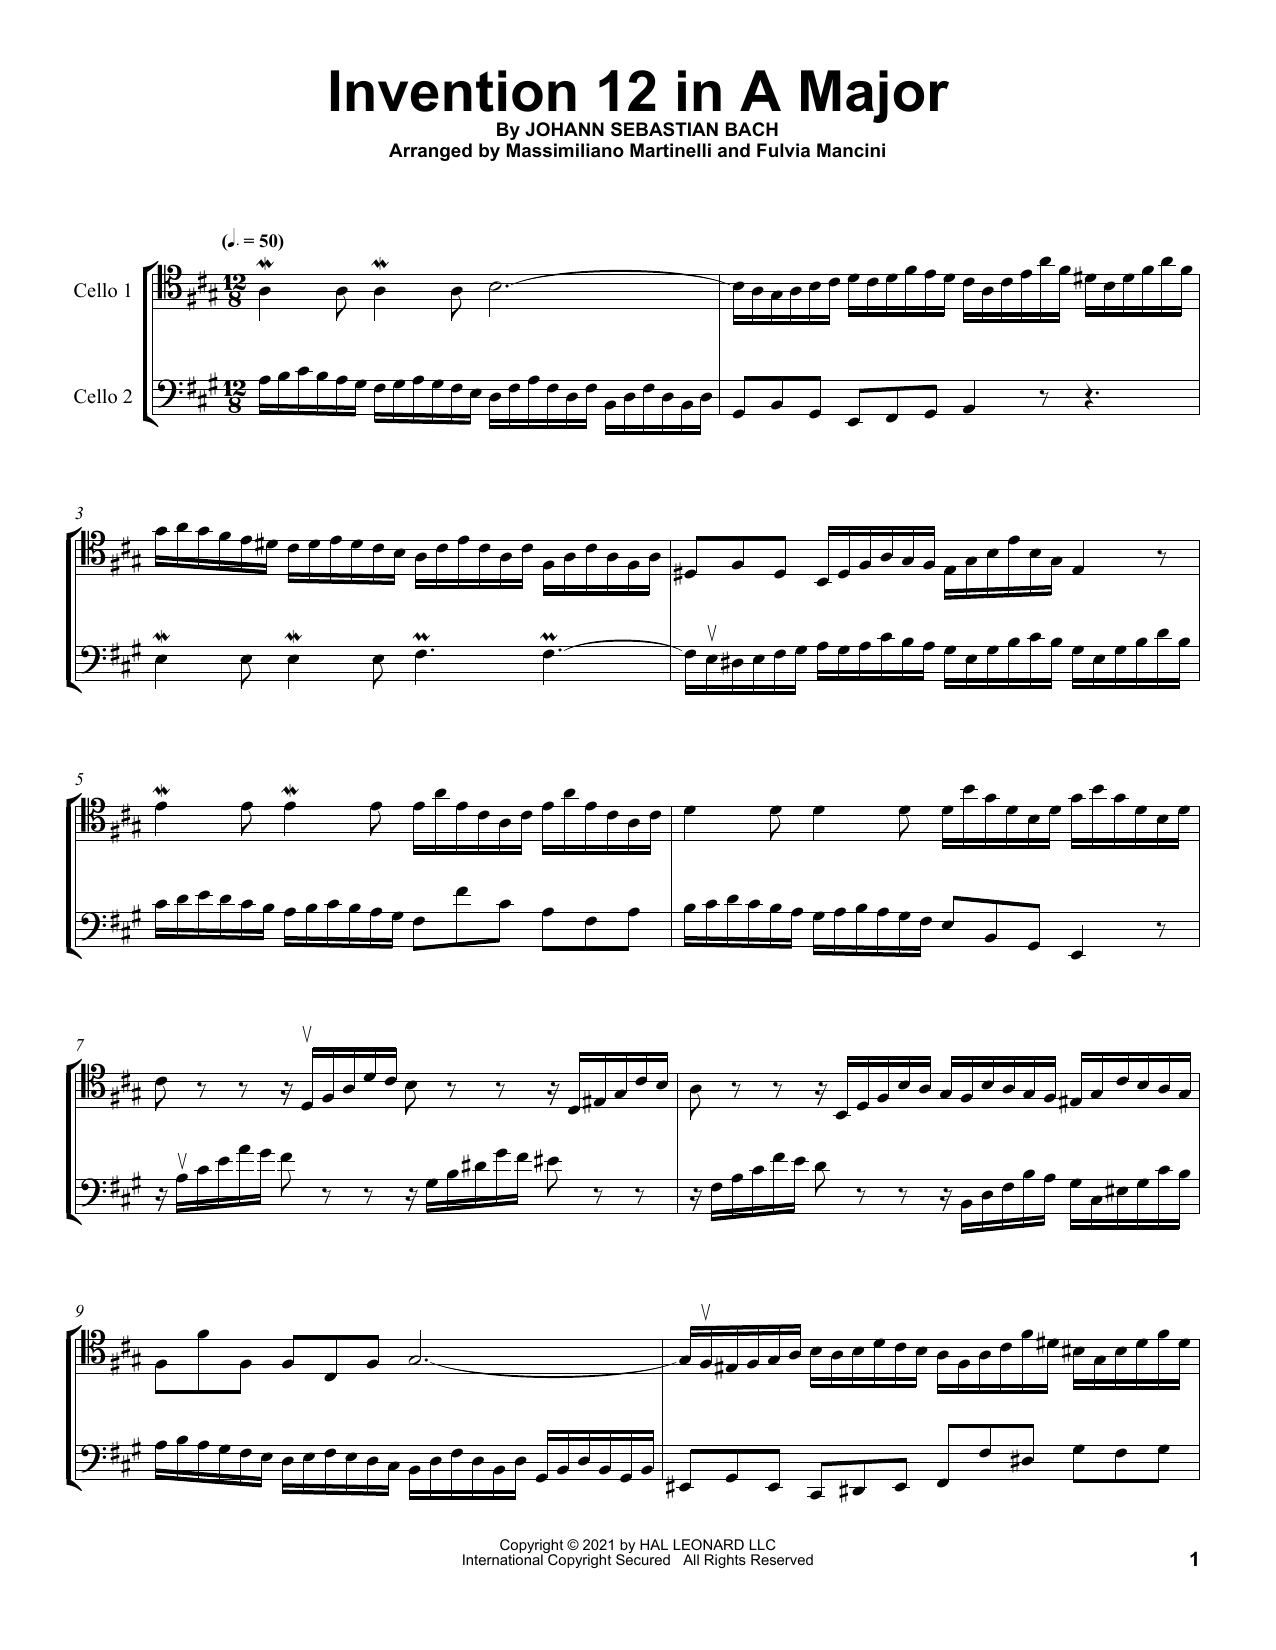 Download Mr & Mrs Cello Invention 12 In A Major Sheet Music